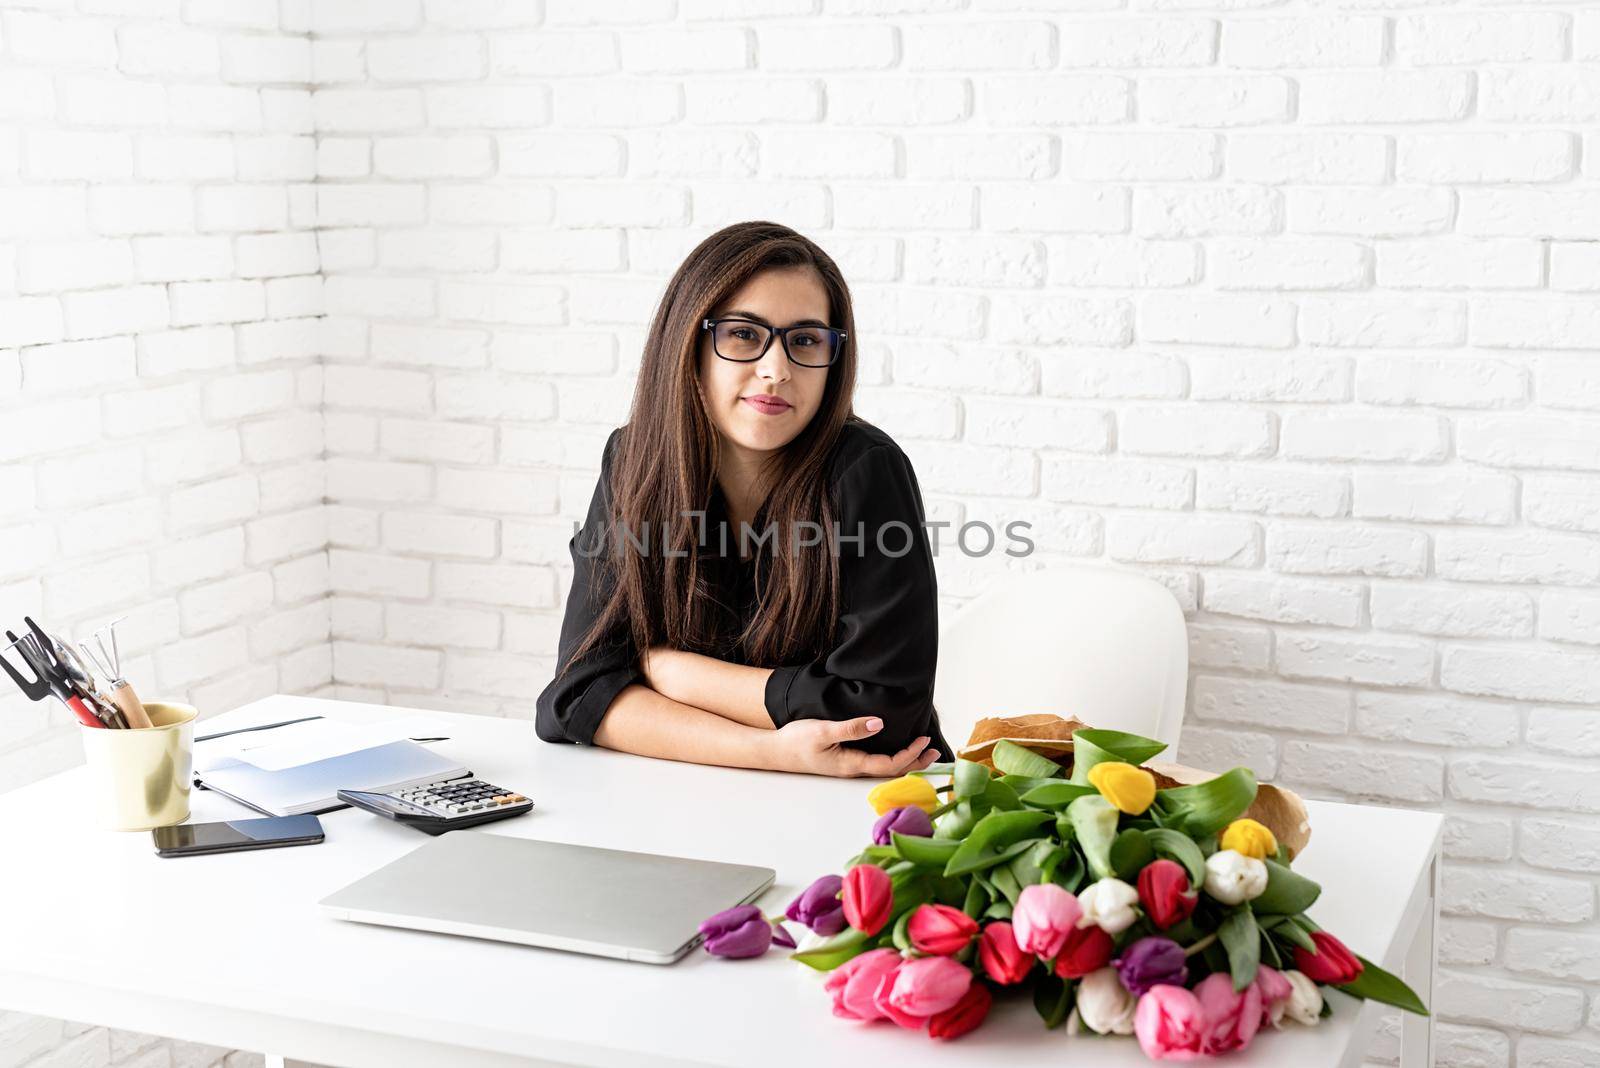 Small business concept. Portrait of young confident business woman working with flowers at the office